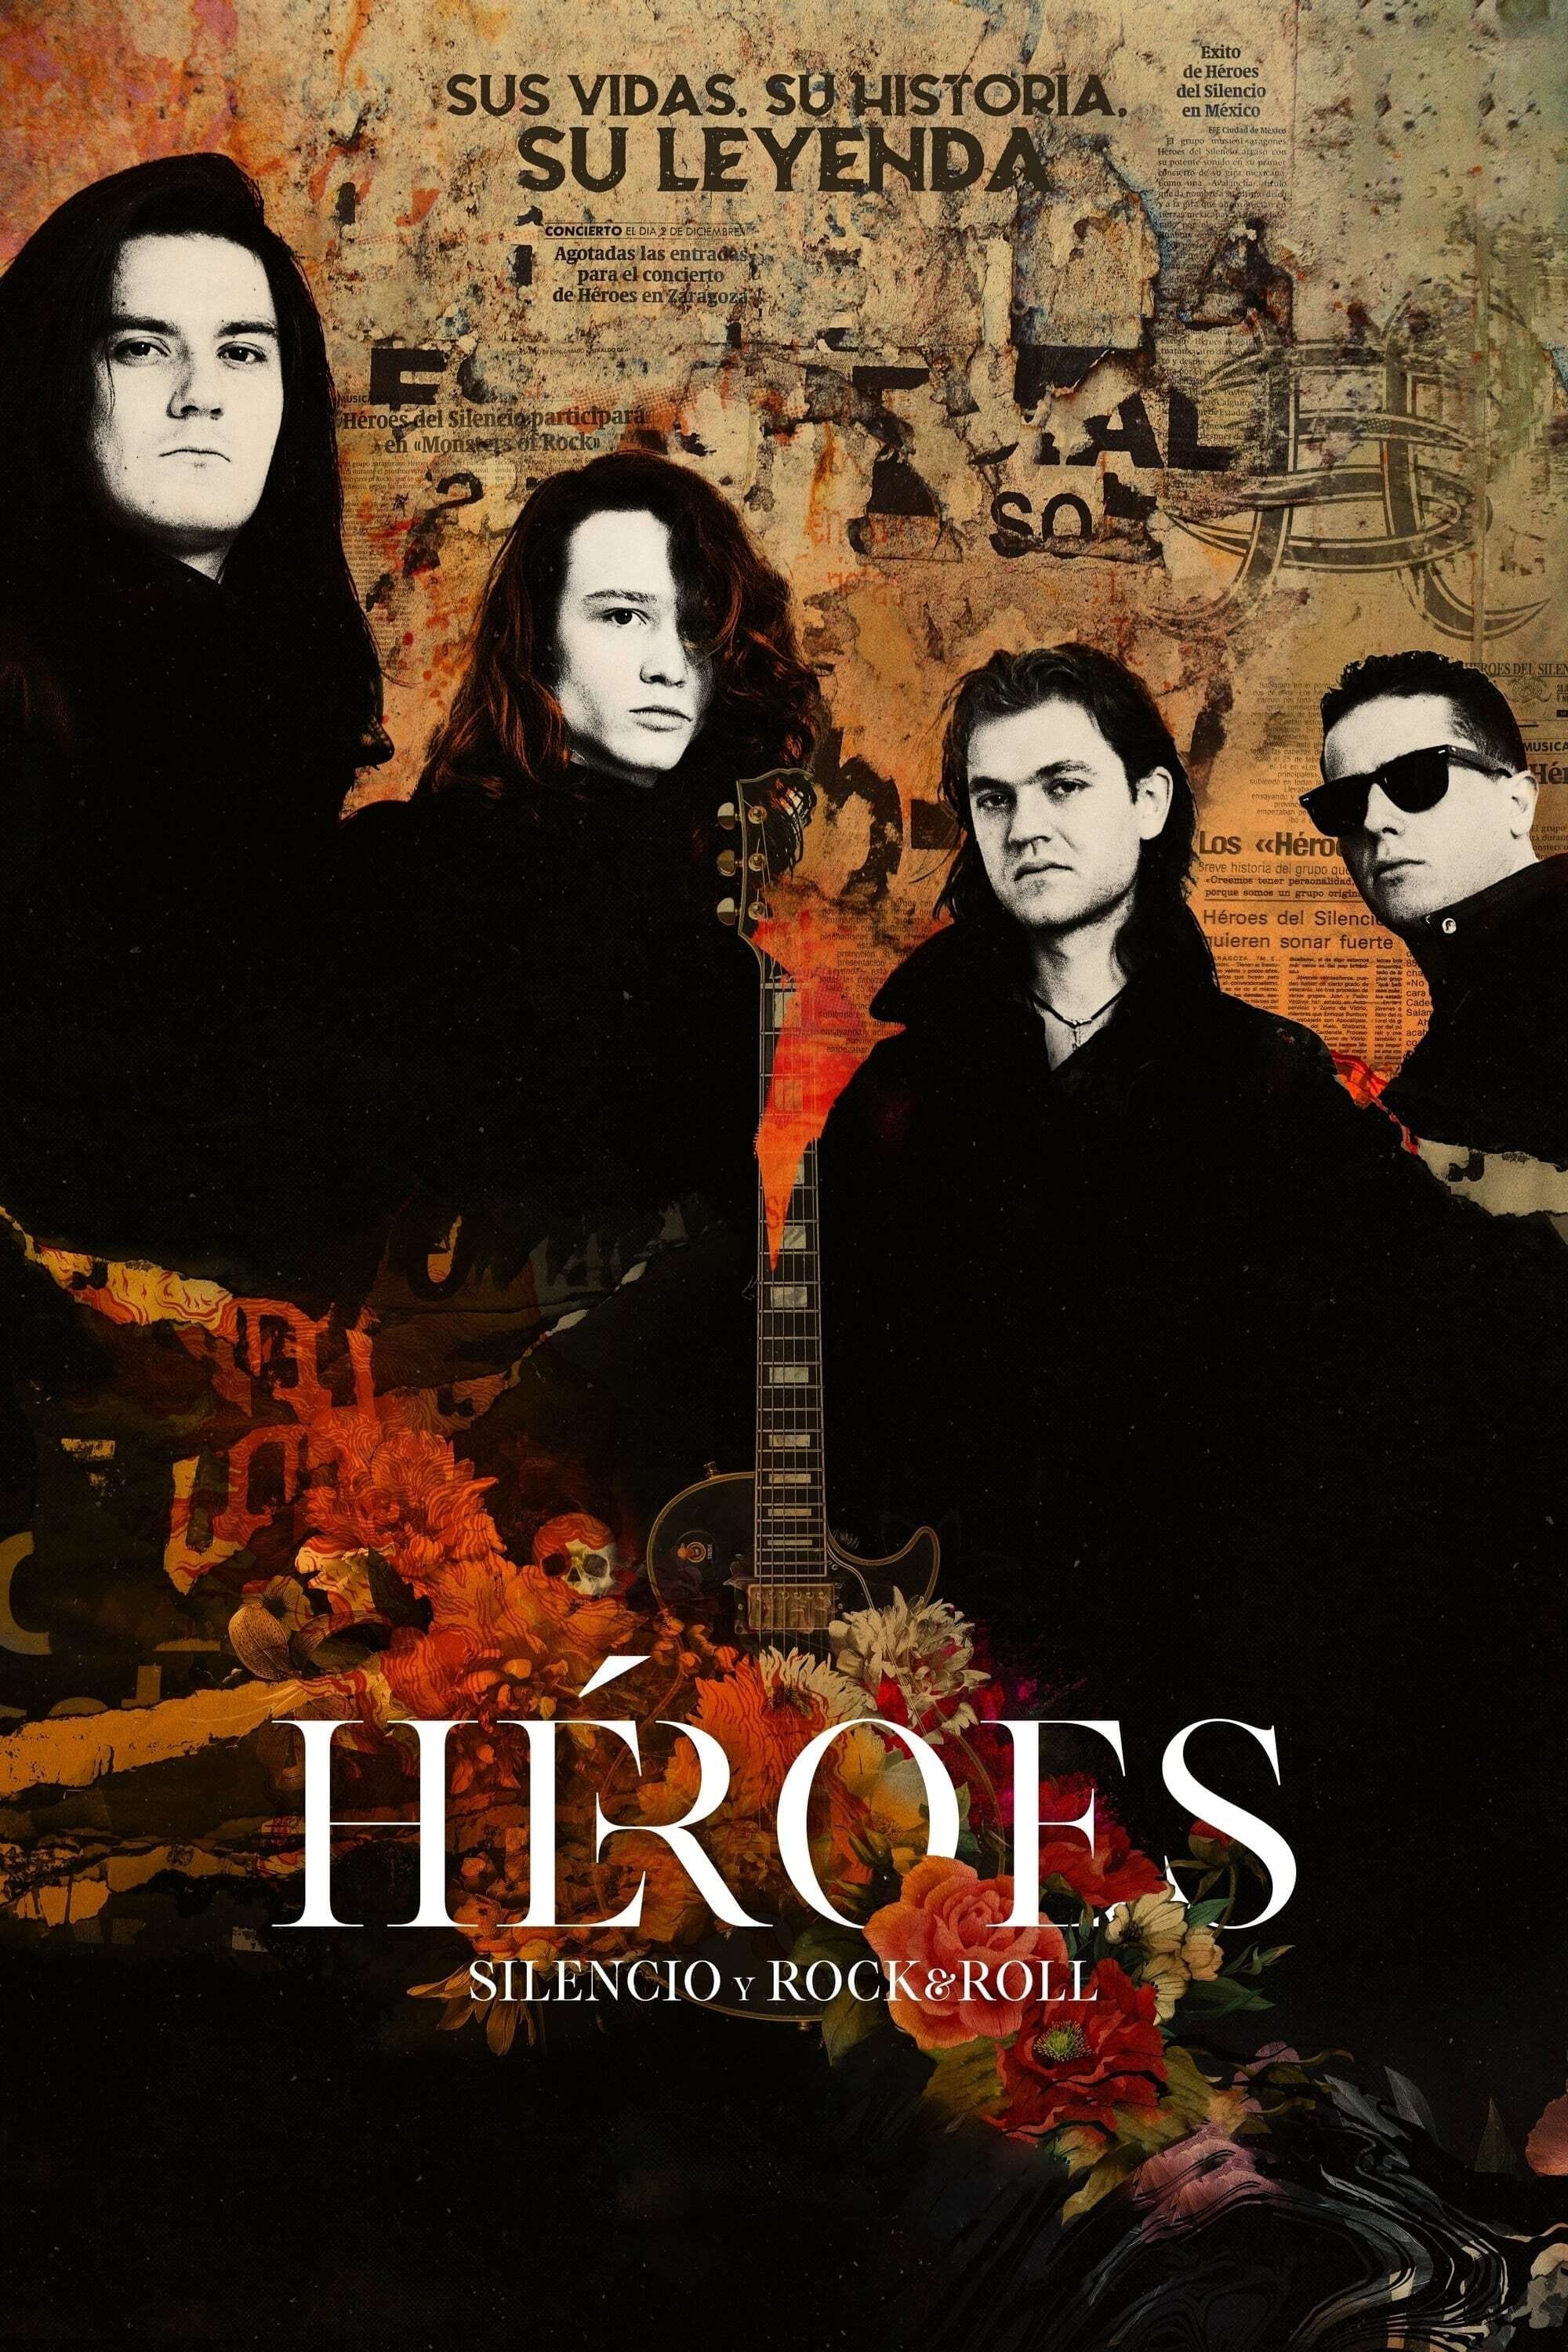 Héroes : Silence et rock and roll